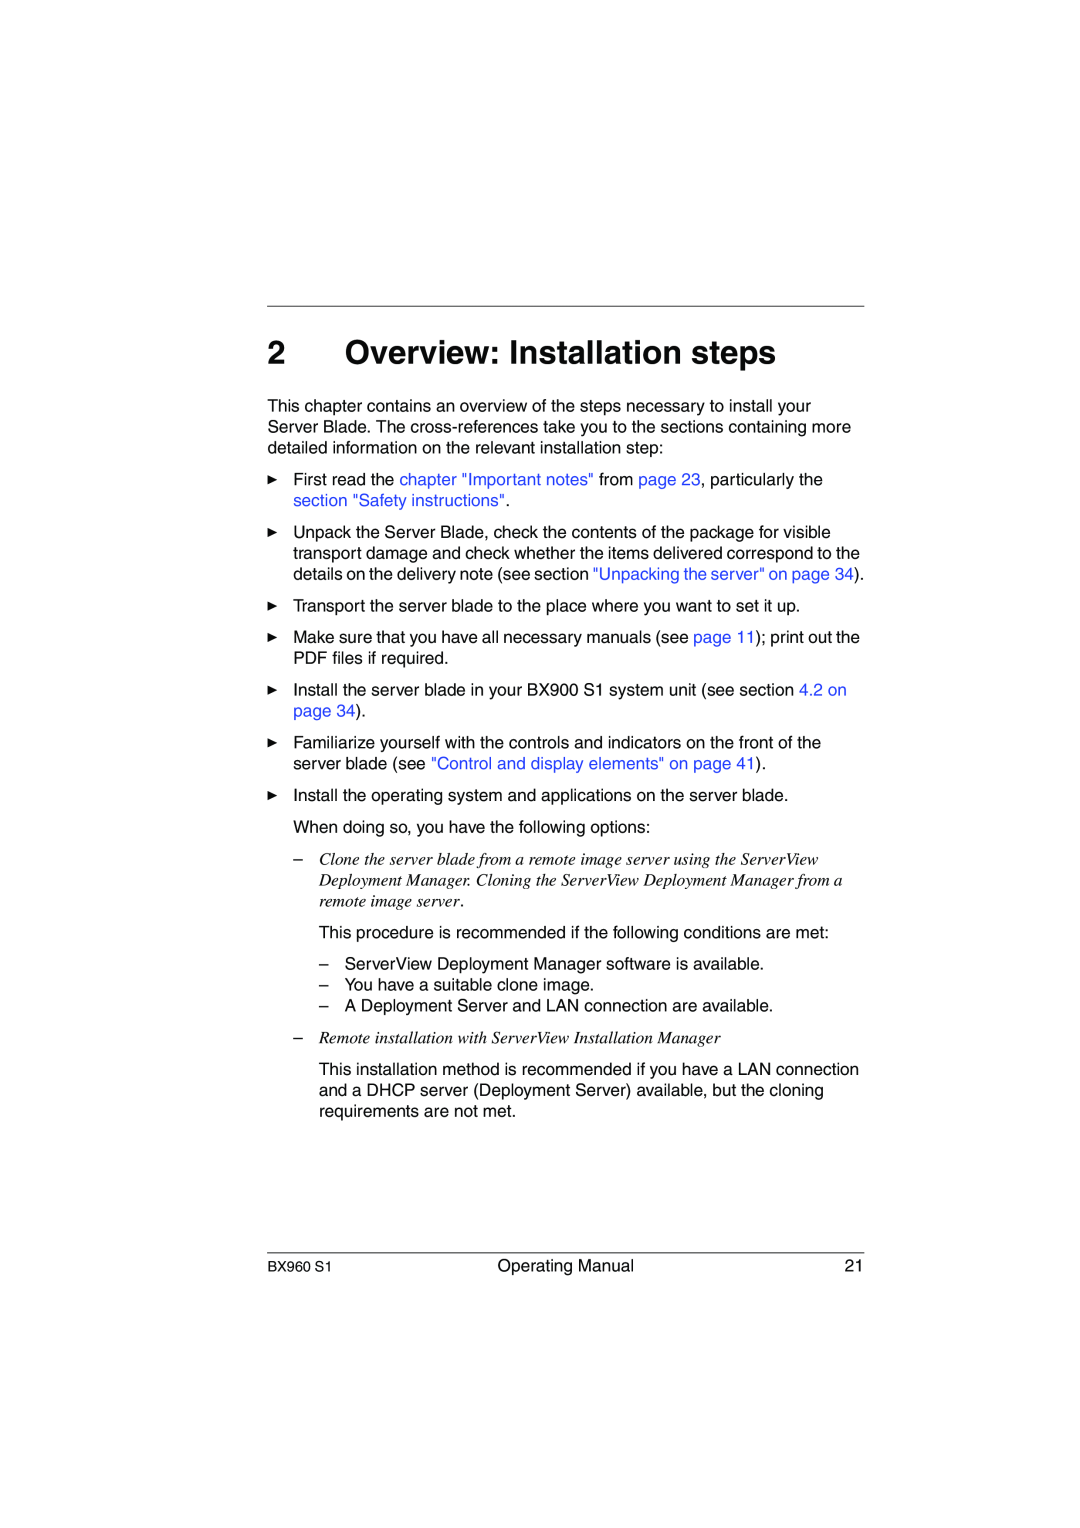 Fujitsu BX960 S1 manual Overview Installation steps, Remote installation with ServerView Installation Manager 